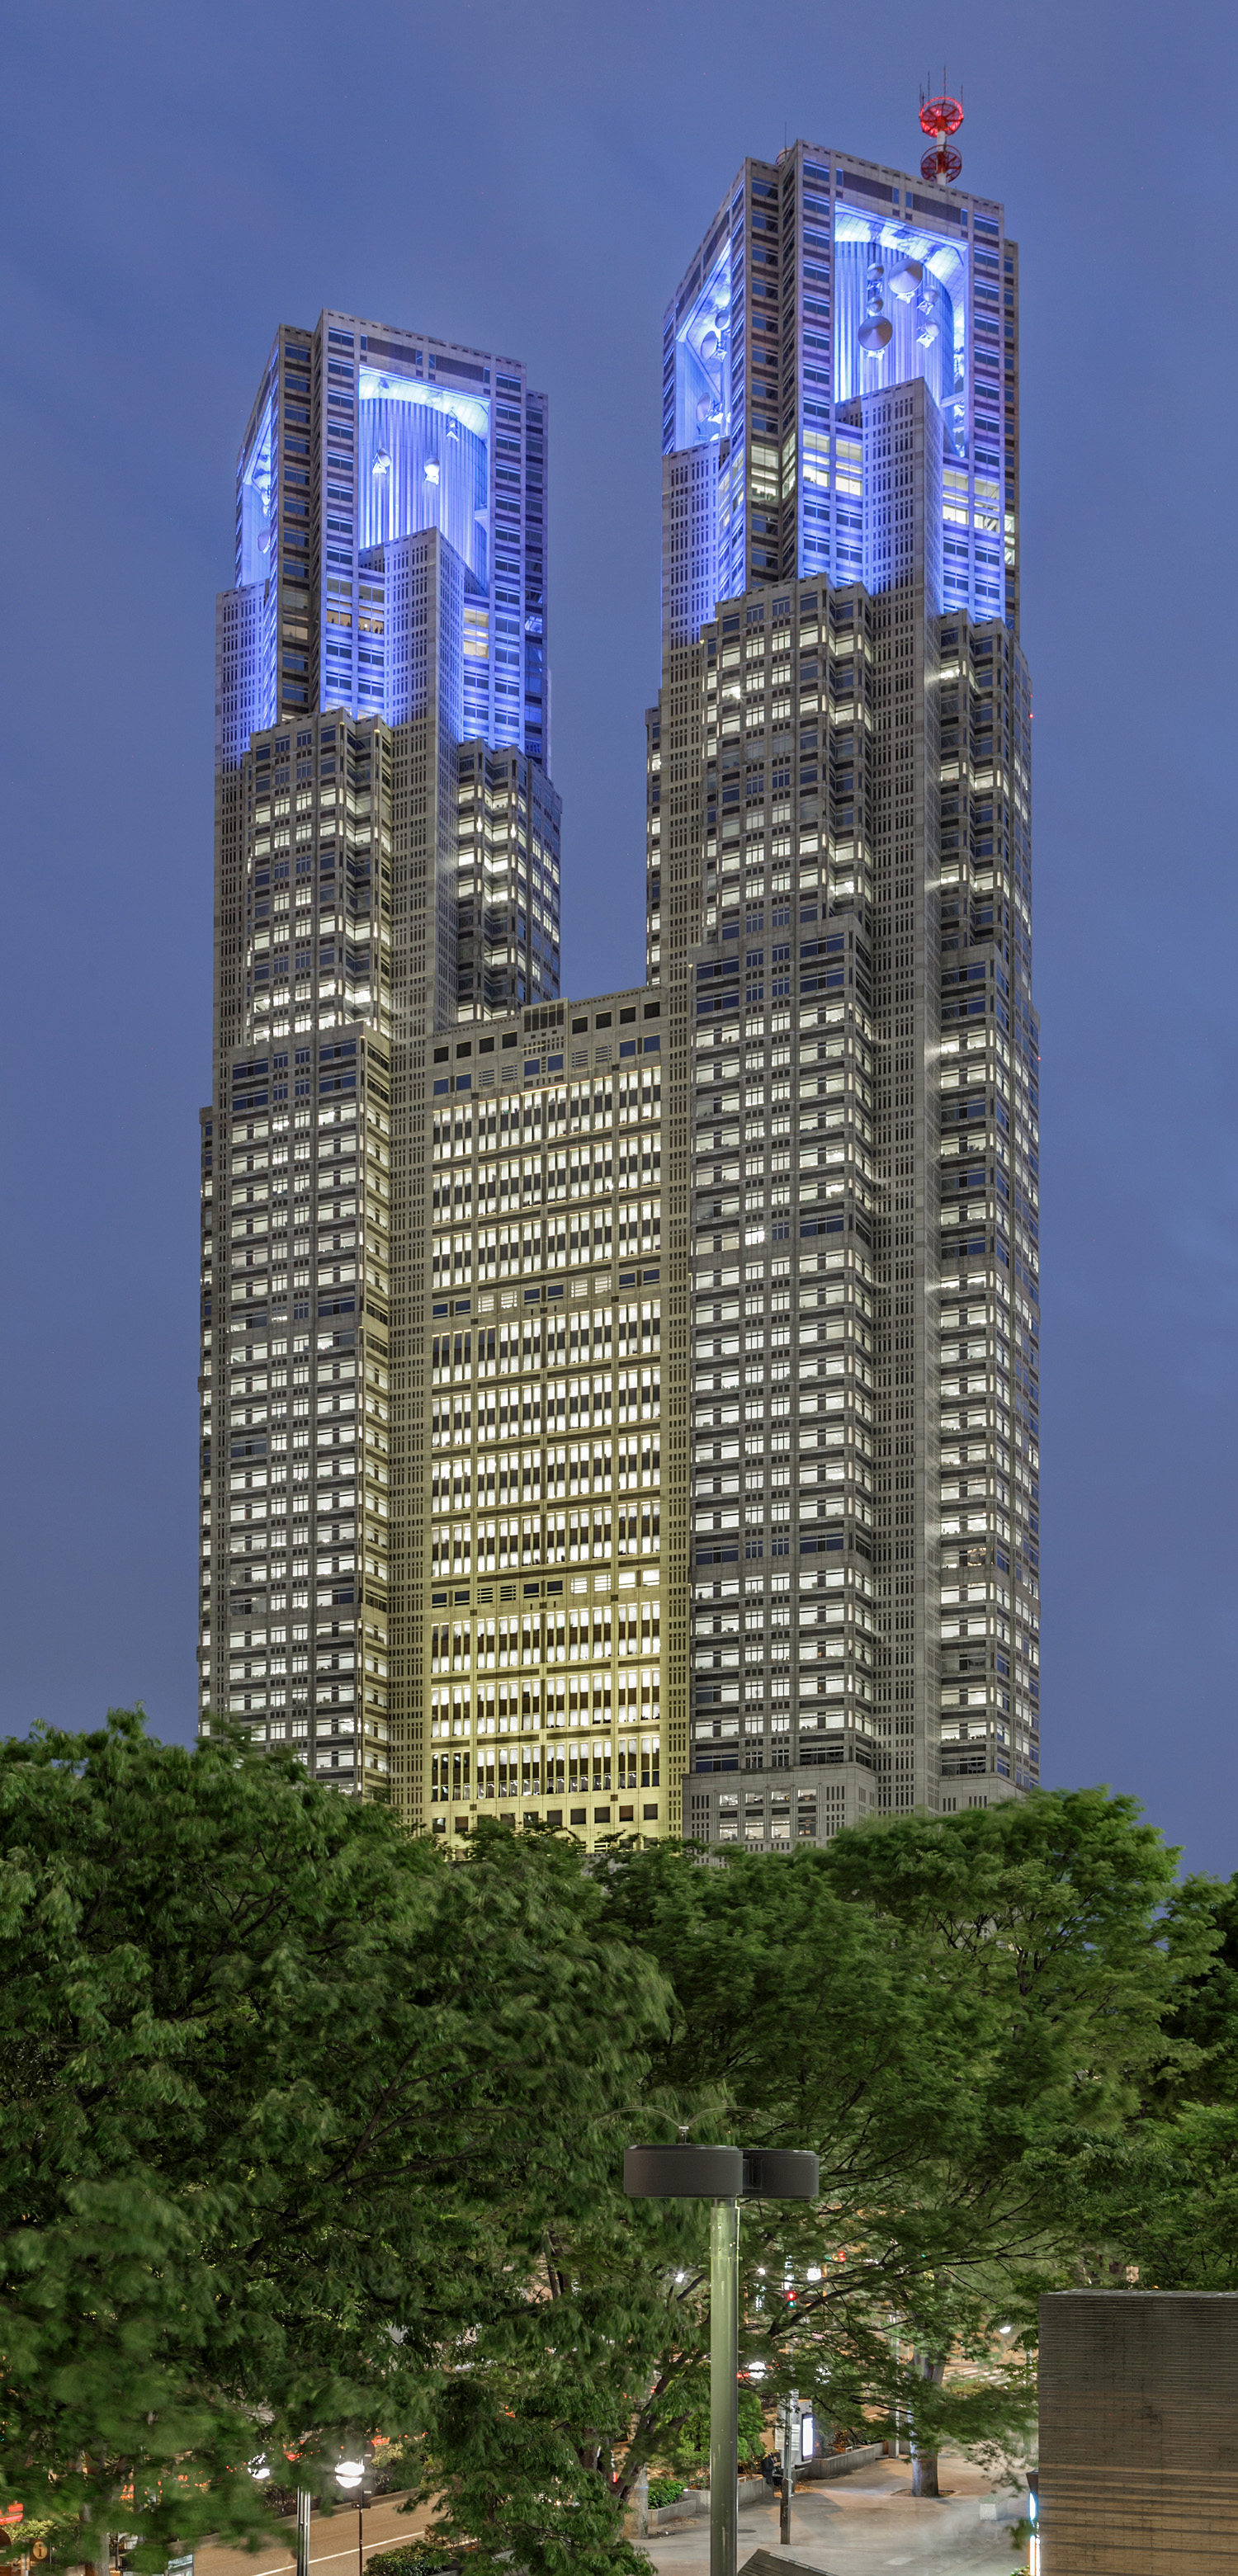 Tokyo Metropolitan Government Building, Tokyo - View from the north. © Mathias Beinling